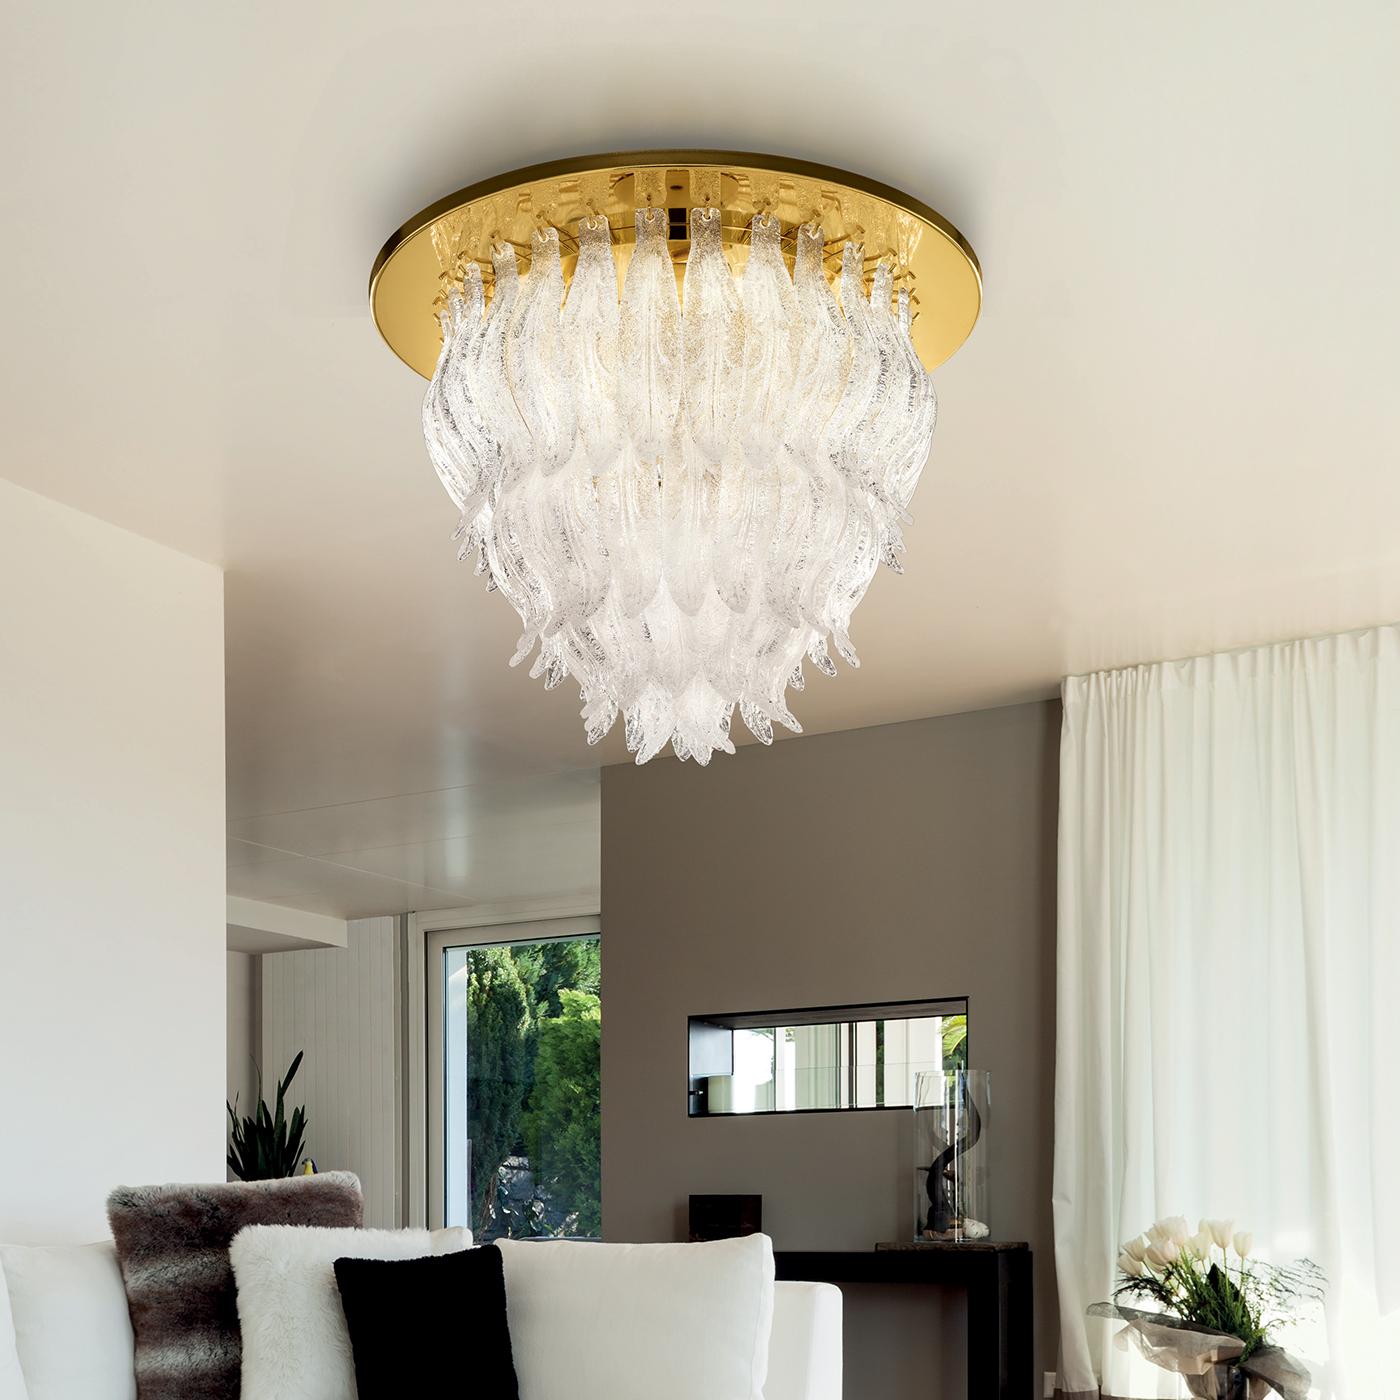 A spectacular design is the characterizing feature of this dazzling crystal ceiling light. This fabulous lighting fixture boasts a cascade of decorative crystals in layered circular rows which is perfectly complimented by the structure detail in